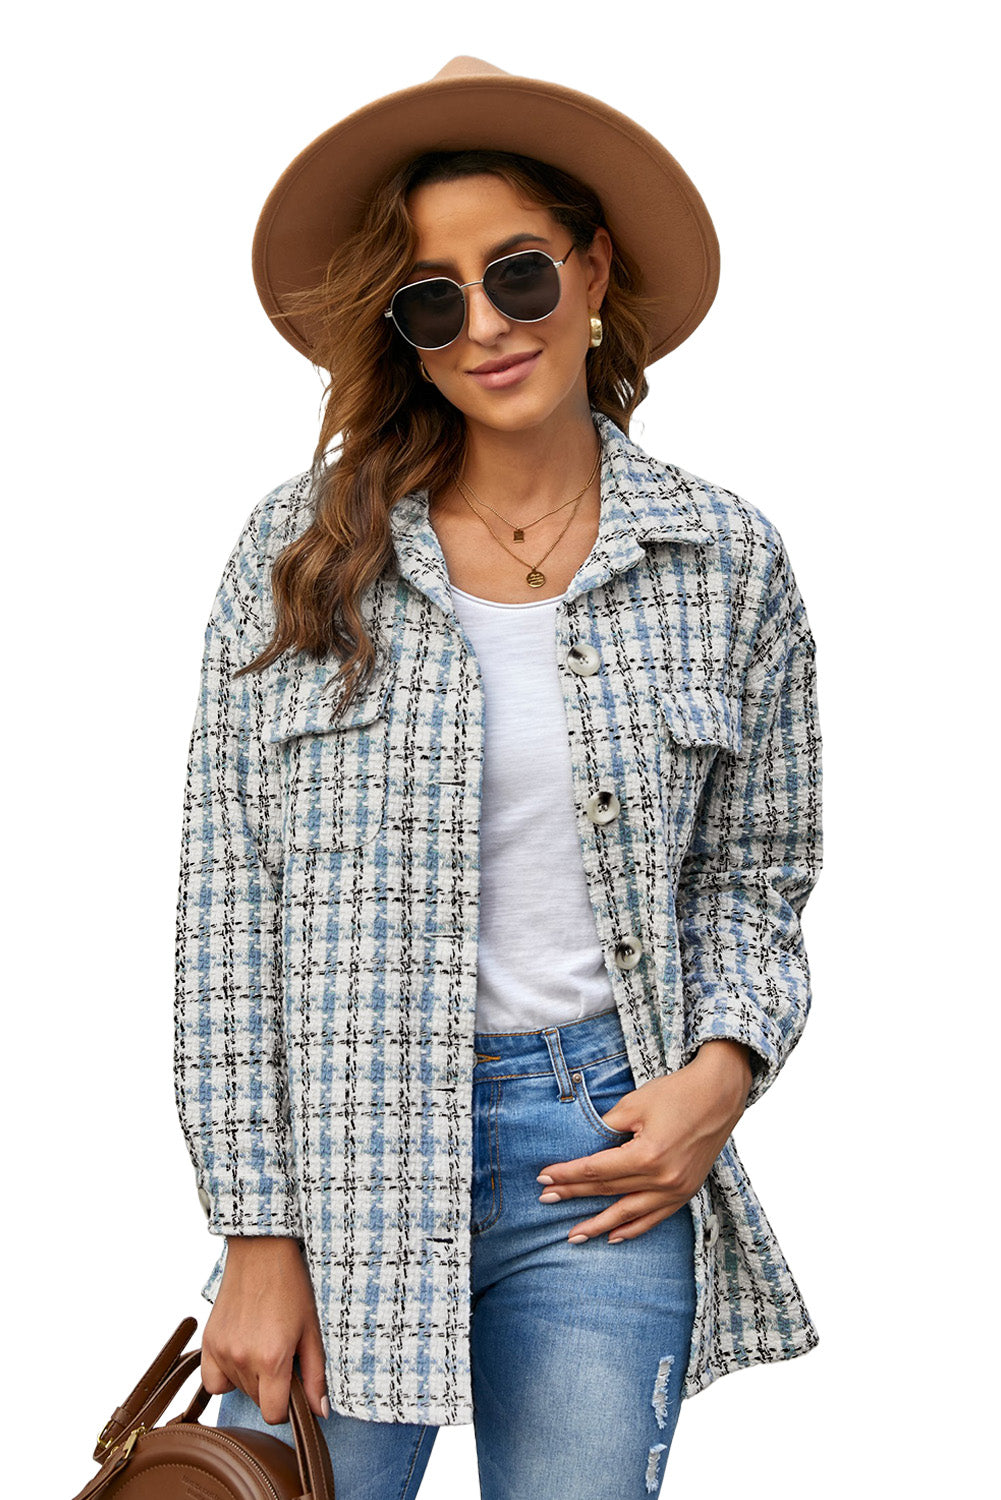 Sky Blue Plaid Print Button Knitted Jacket with Pocket